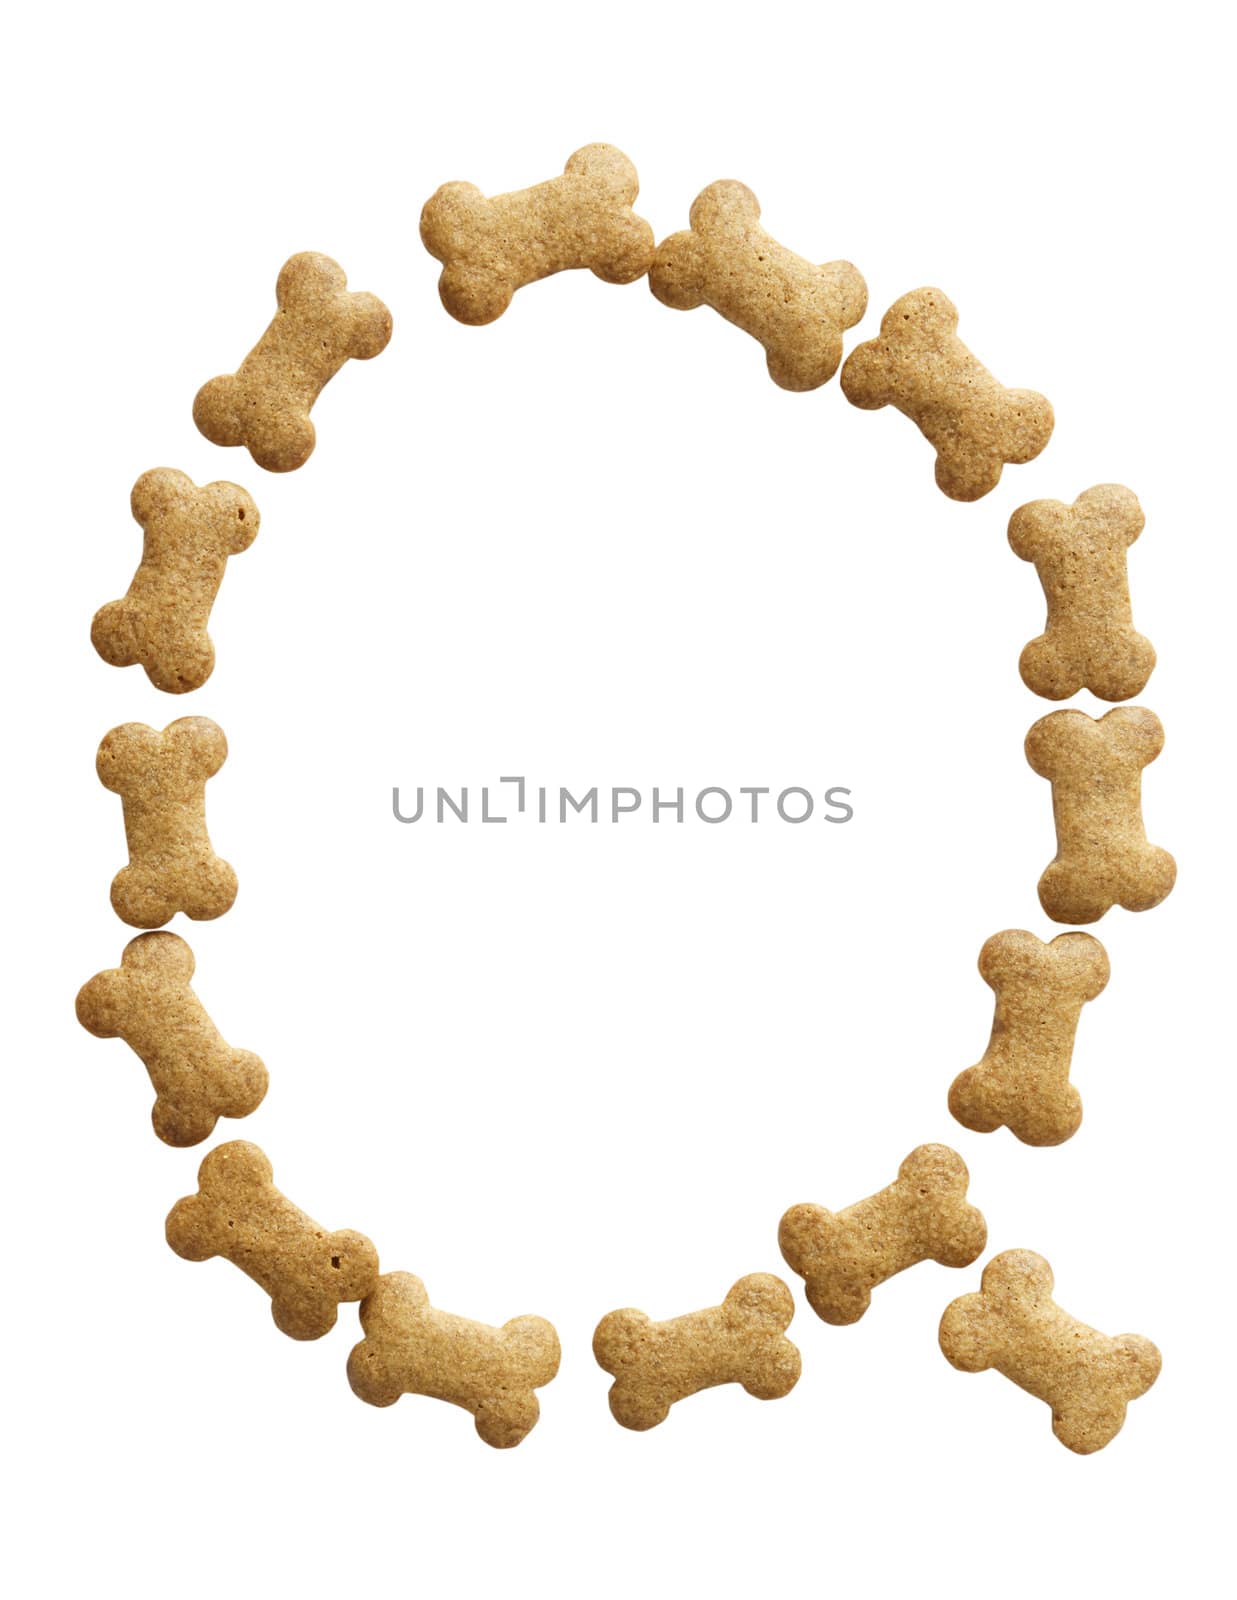 Letter Q made of bone shape dog food on white background, shot directly from above